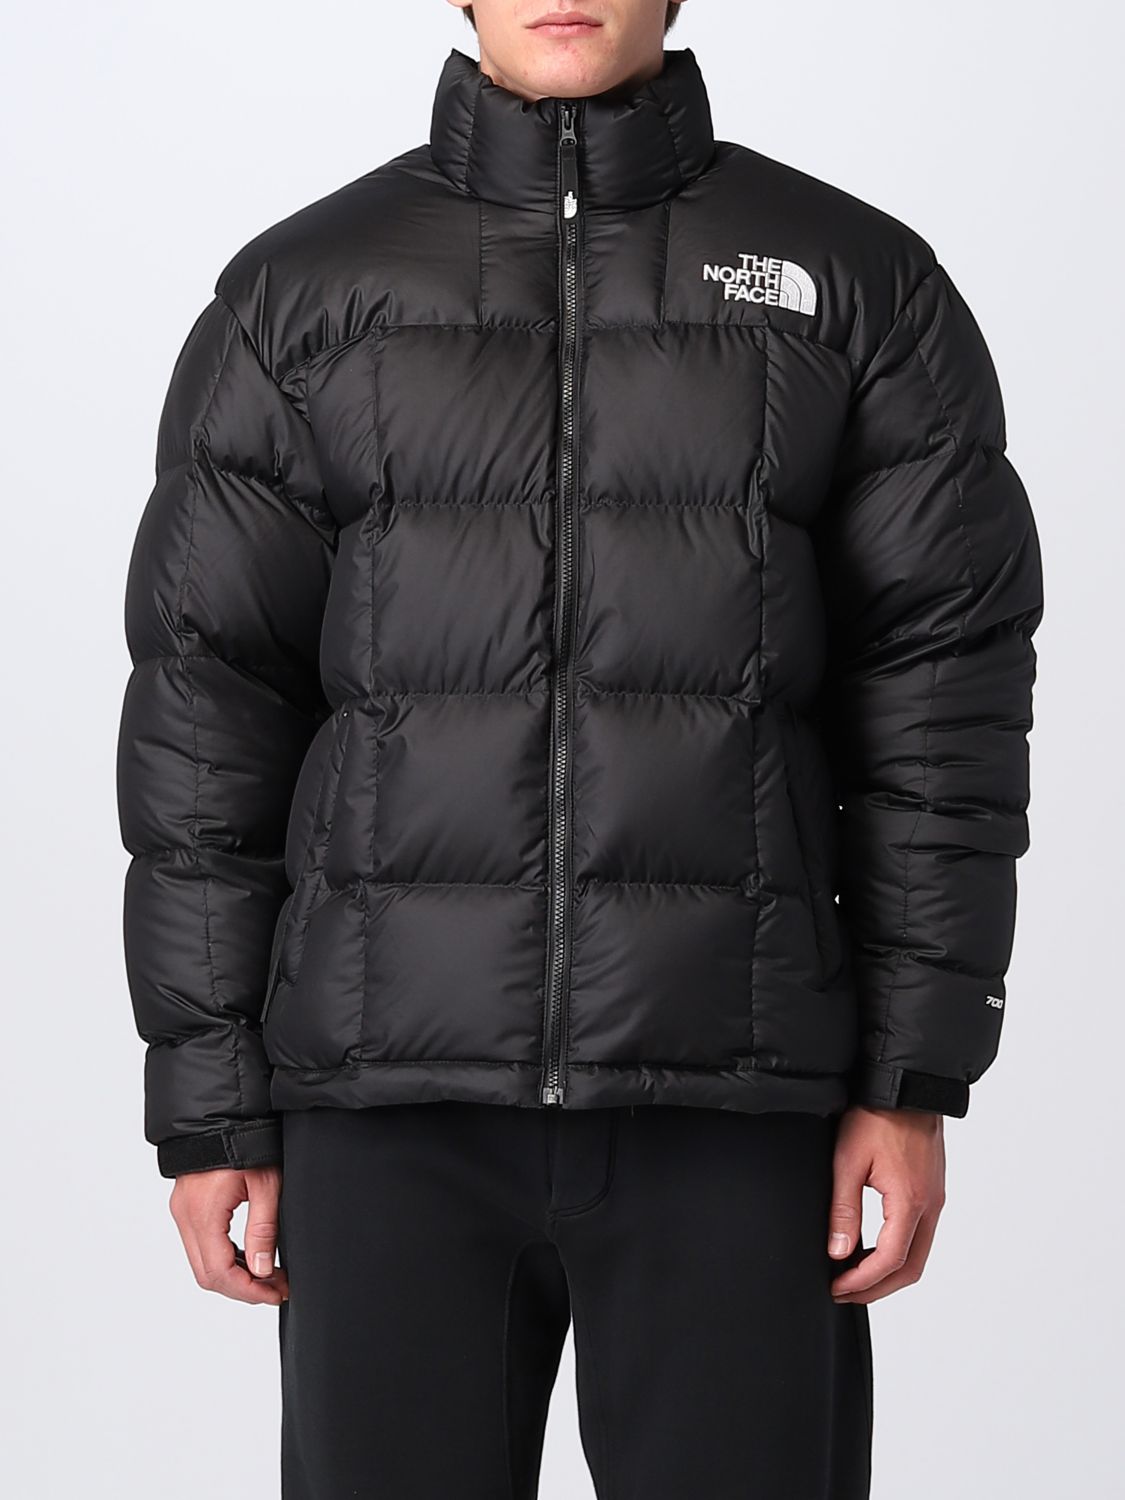 The North Face Puffer Jacket Mens Black | lupon.gov.ph